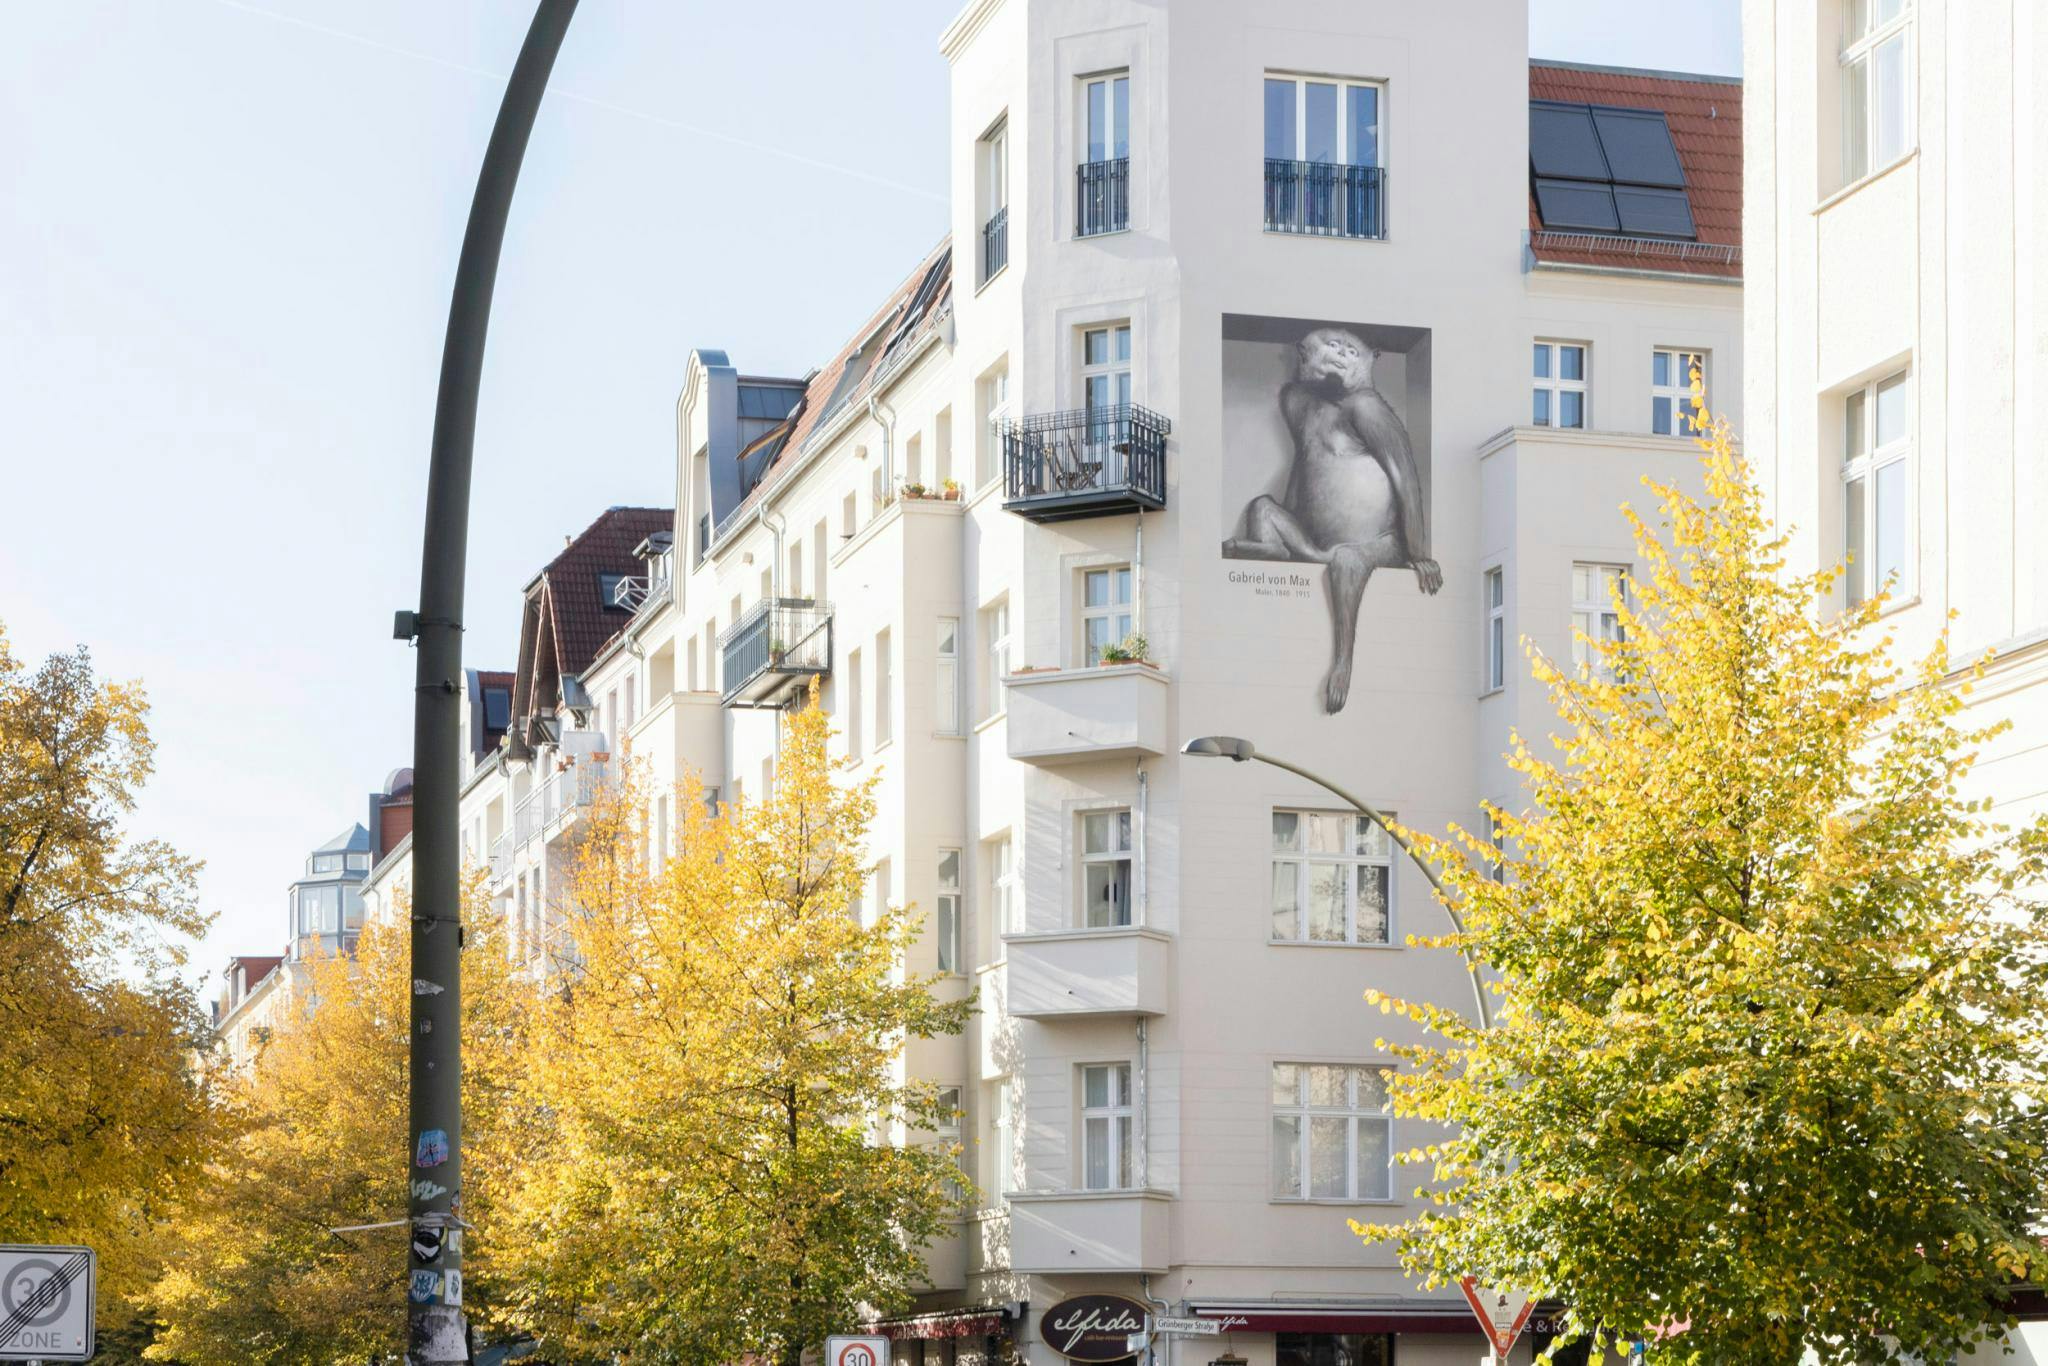 A large white building with a mural of a woman on its side is located in a city, surrounded by trees and a street.